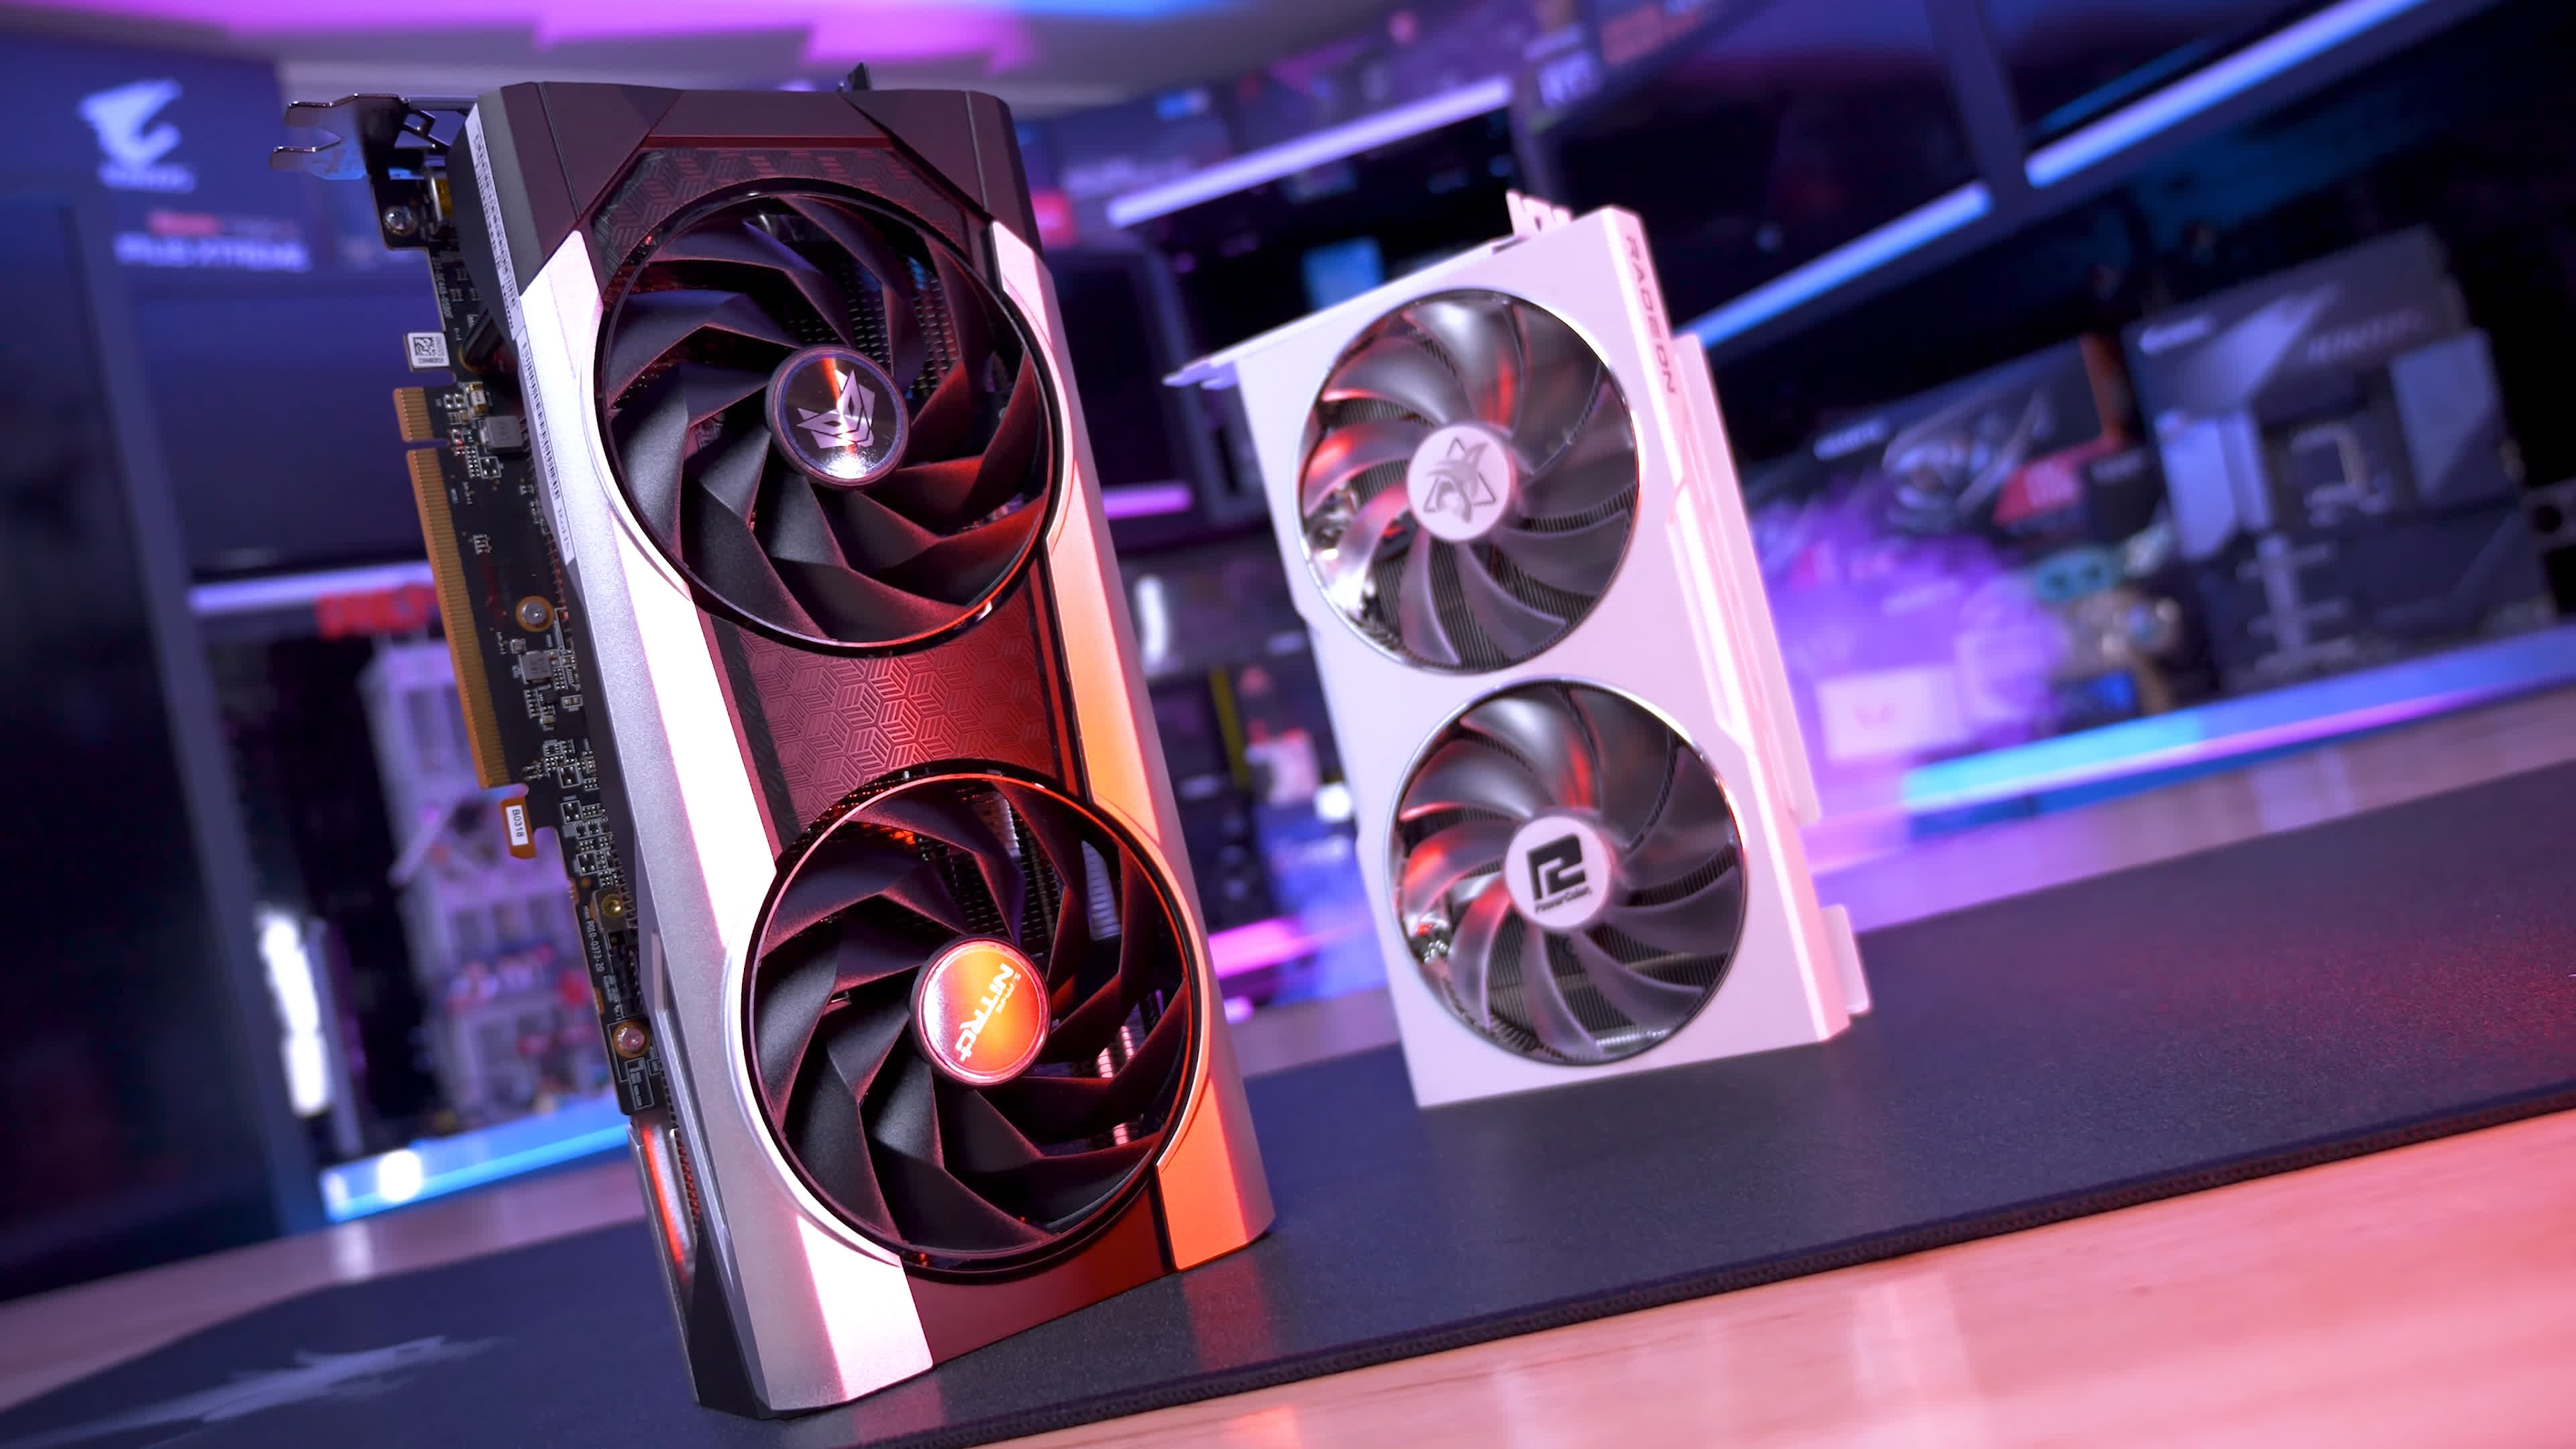 Refreshed AMD Radeon RX 6000 graphics cards are in stock at MSRP